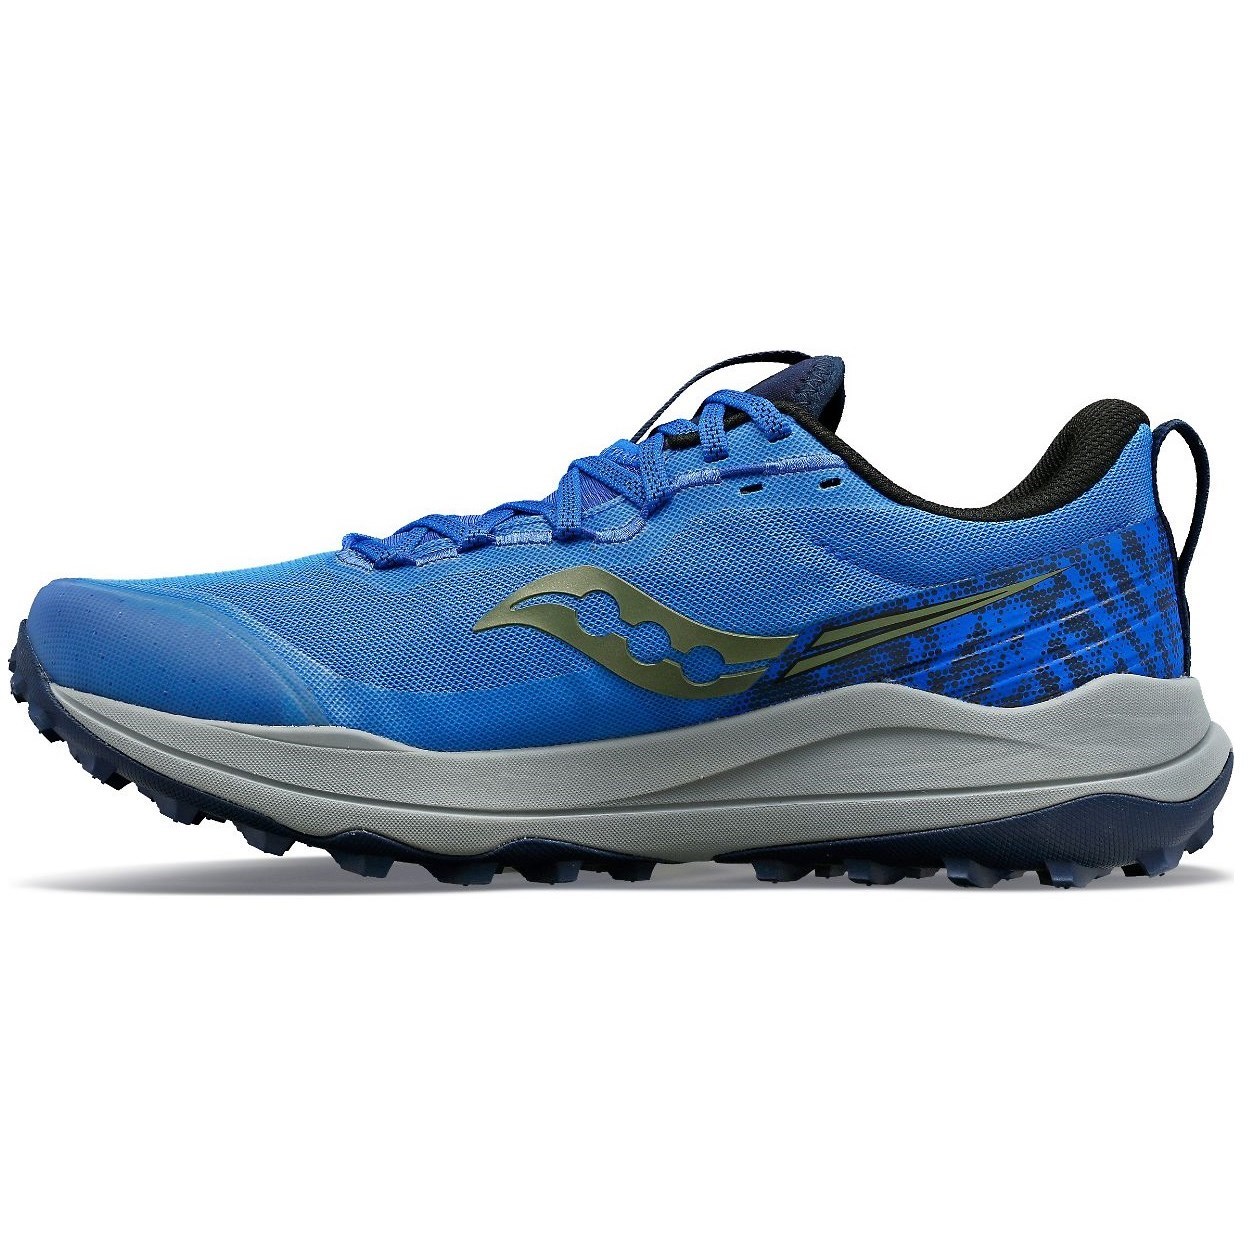 Saucony Xodus Ultra 2 - Mens Trail Running Shoes - Superblue/Night ...